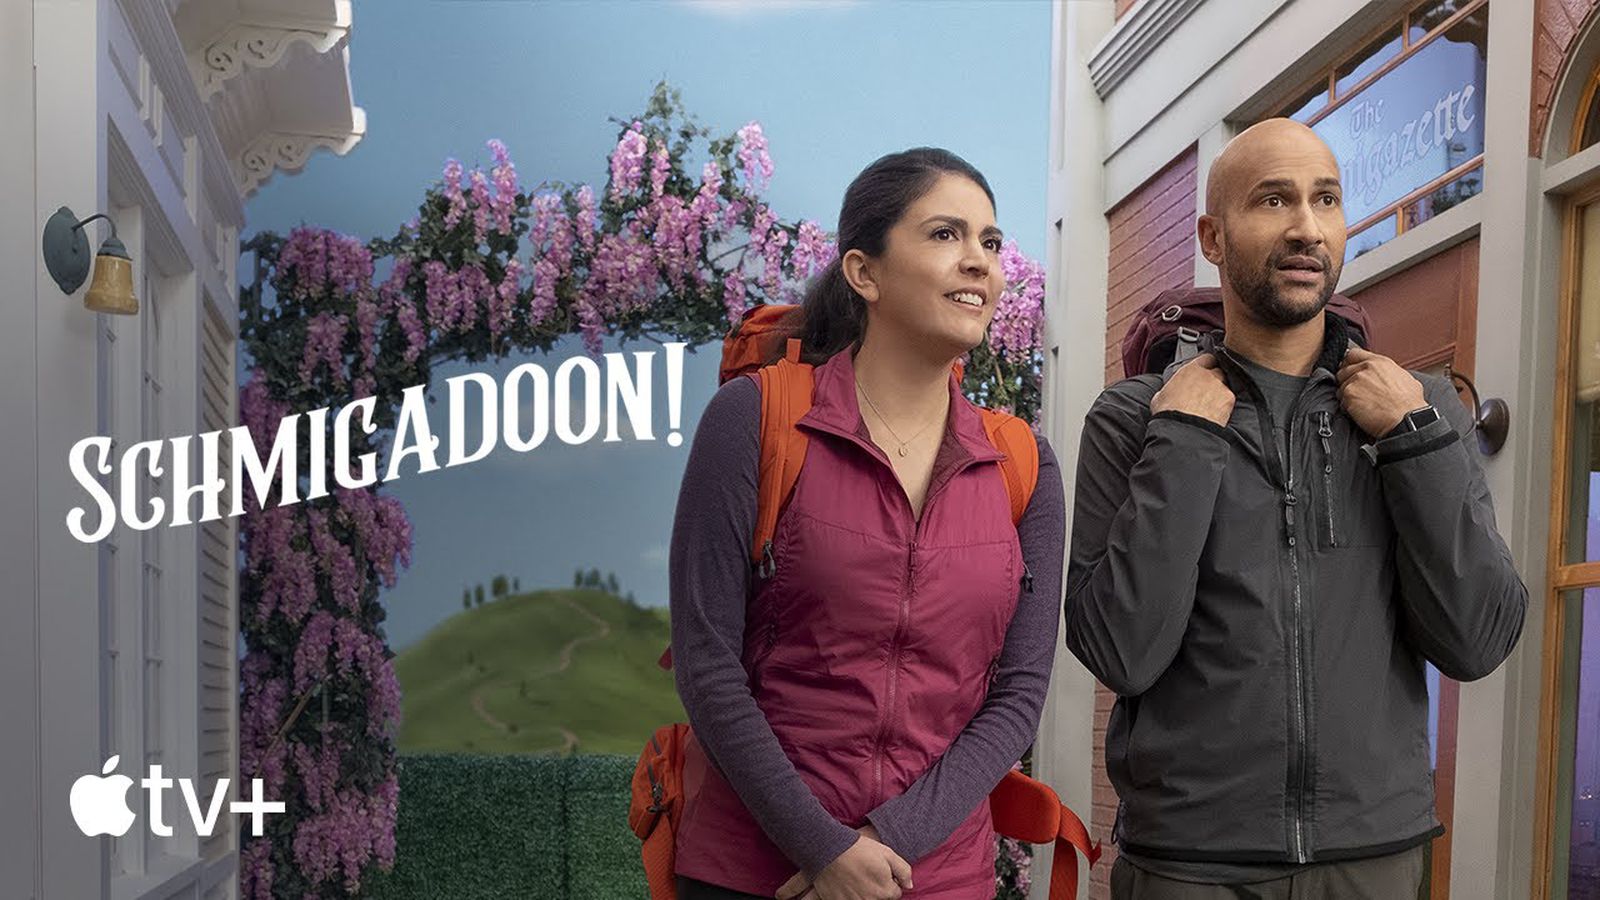 Apple TV+ Shares Trailer for Musical Comedy Series &#39;Schmigadoon!&#39; Ahead of July 16 Premiere - MacRumors